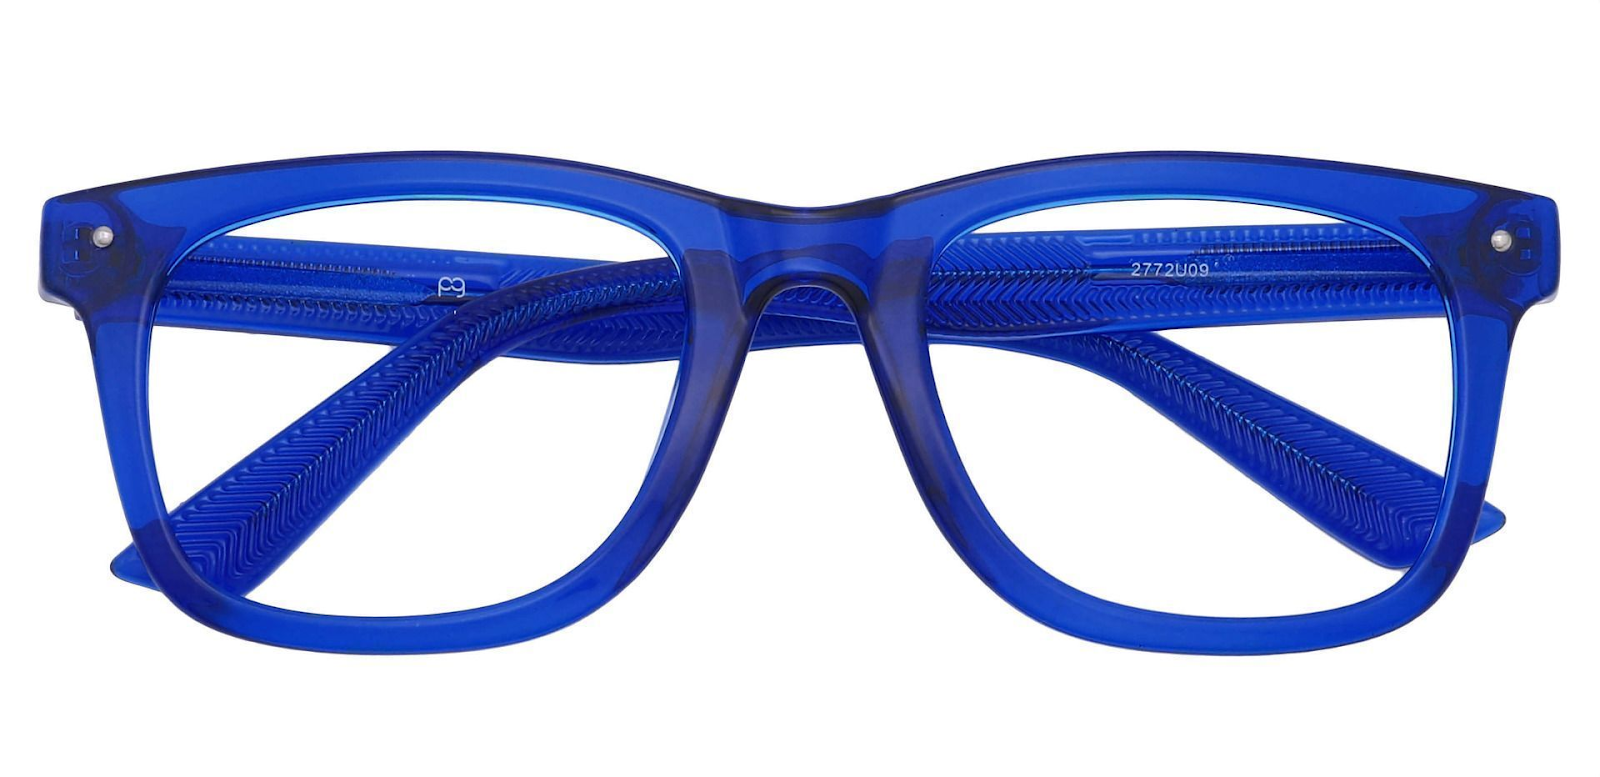 A pair of glasses with blue McKinley Square frames.